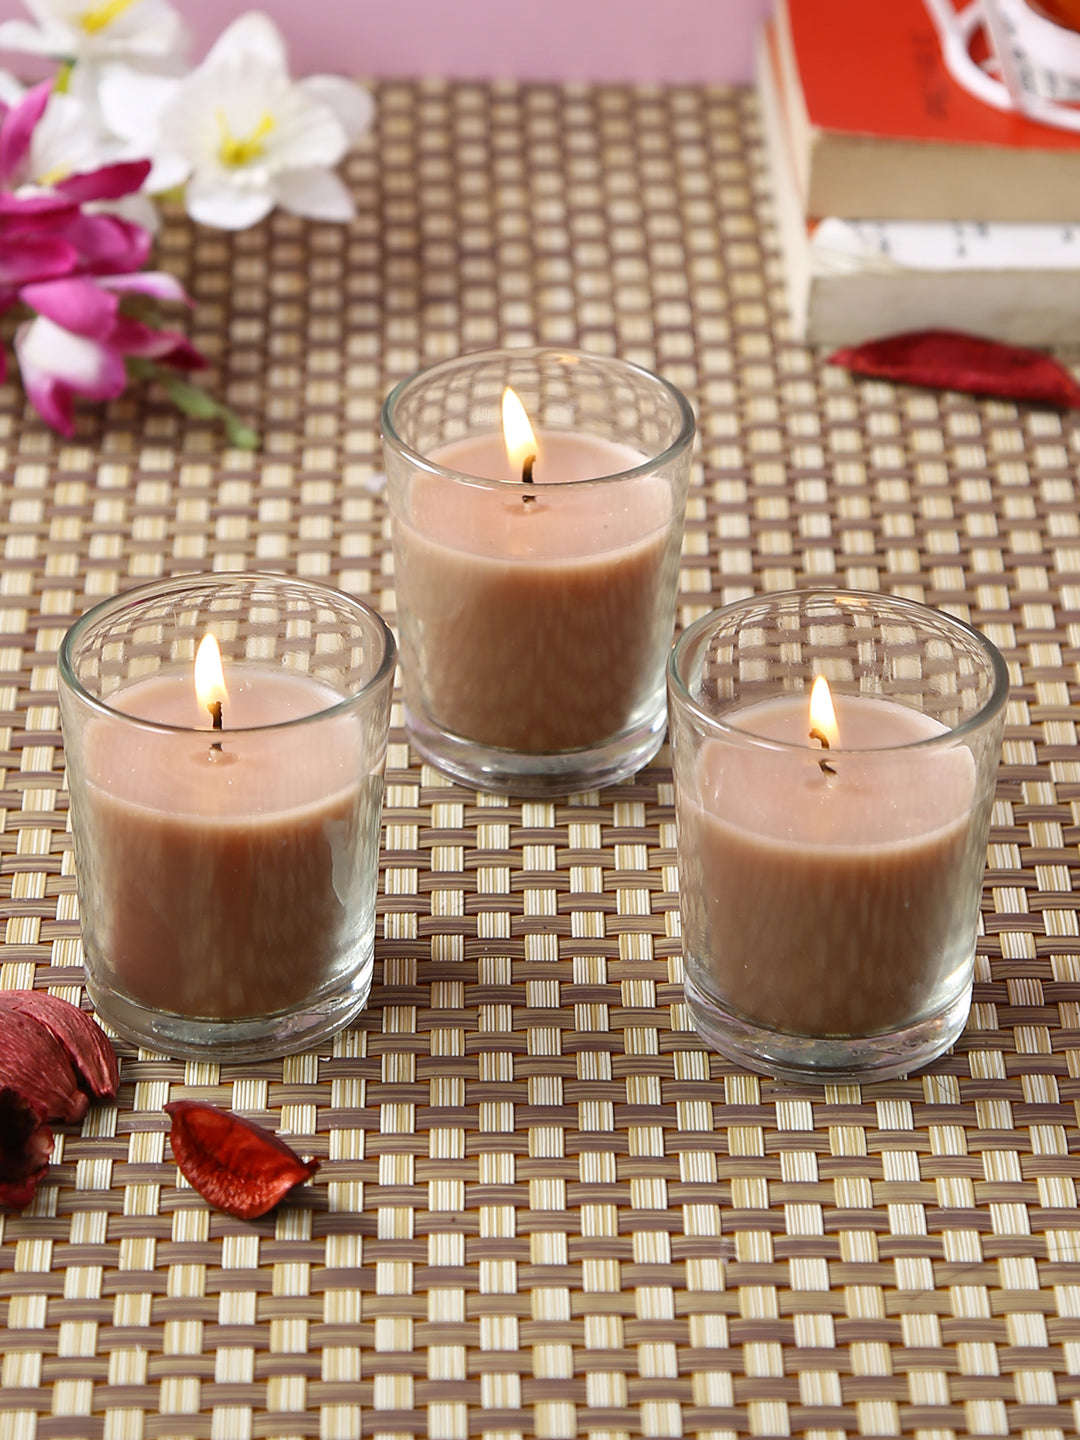 Set of 3 Hosley® Highly Fragranced Hazelnut Creme Filled Glass Candles, 1.6 Oz wax each